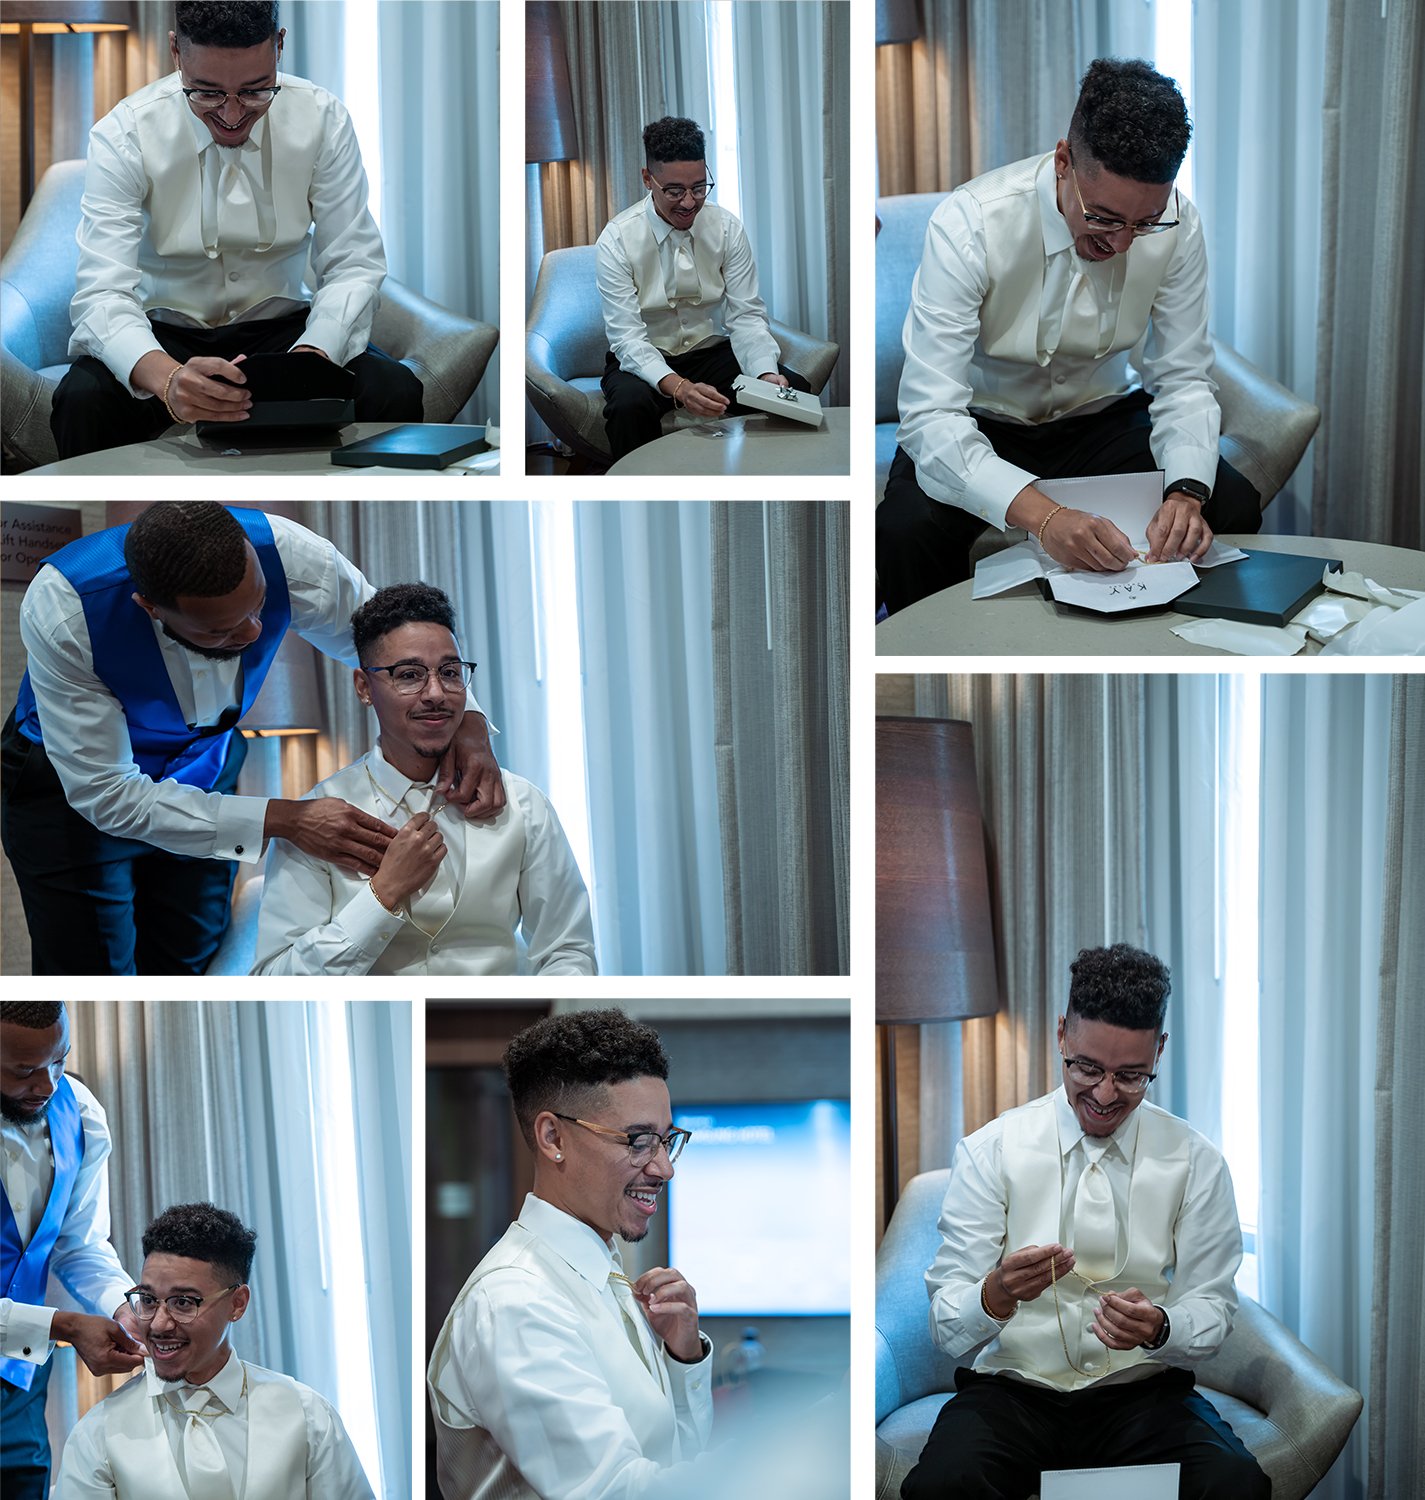 Groom opening a wedding present from his bride